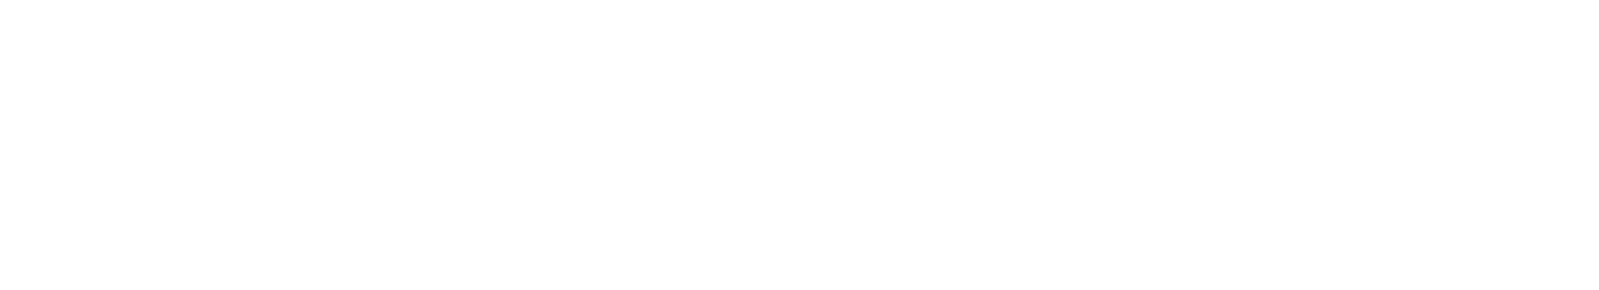 United Airlines Holdings
 logo large for dark backgrounds (transparent PNG)